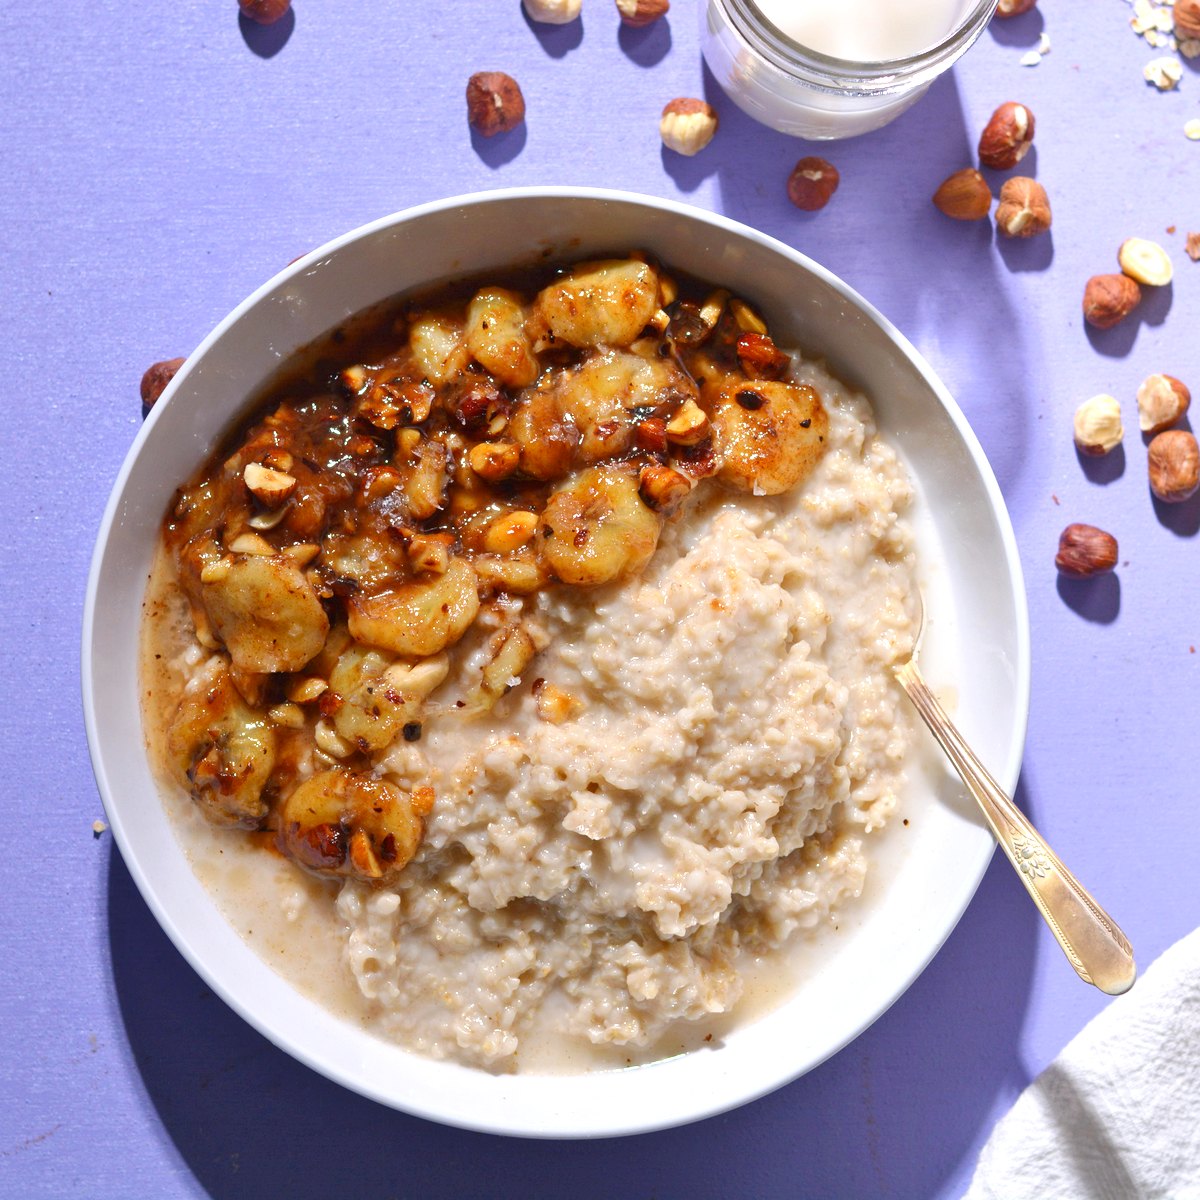 Overhead of oatmeal topped with caramelized bananas.